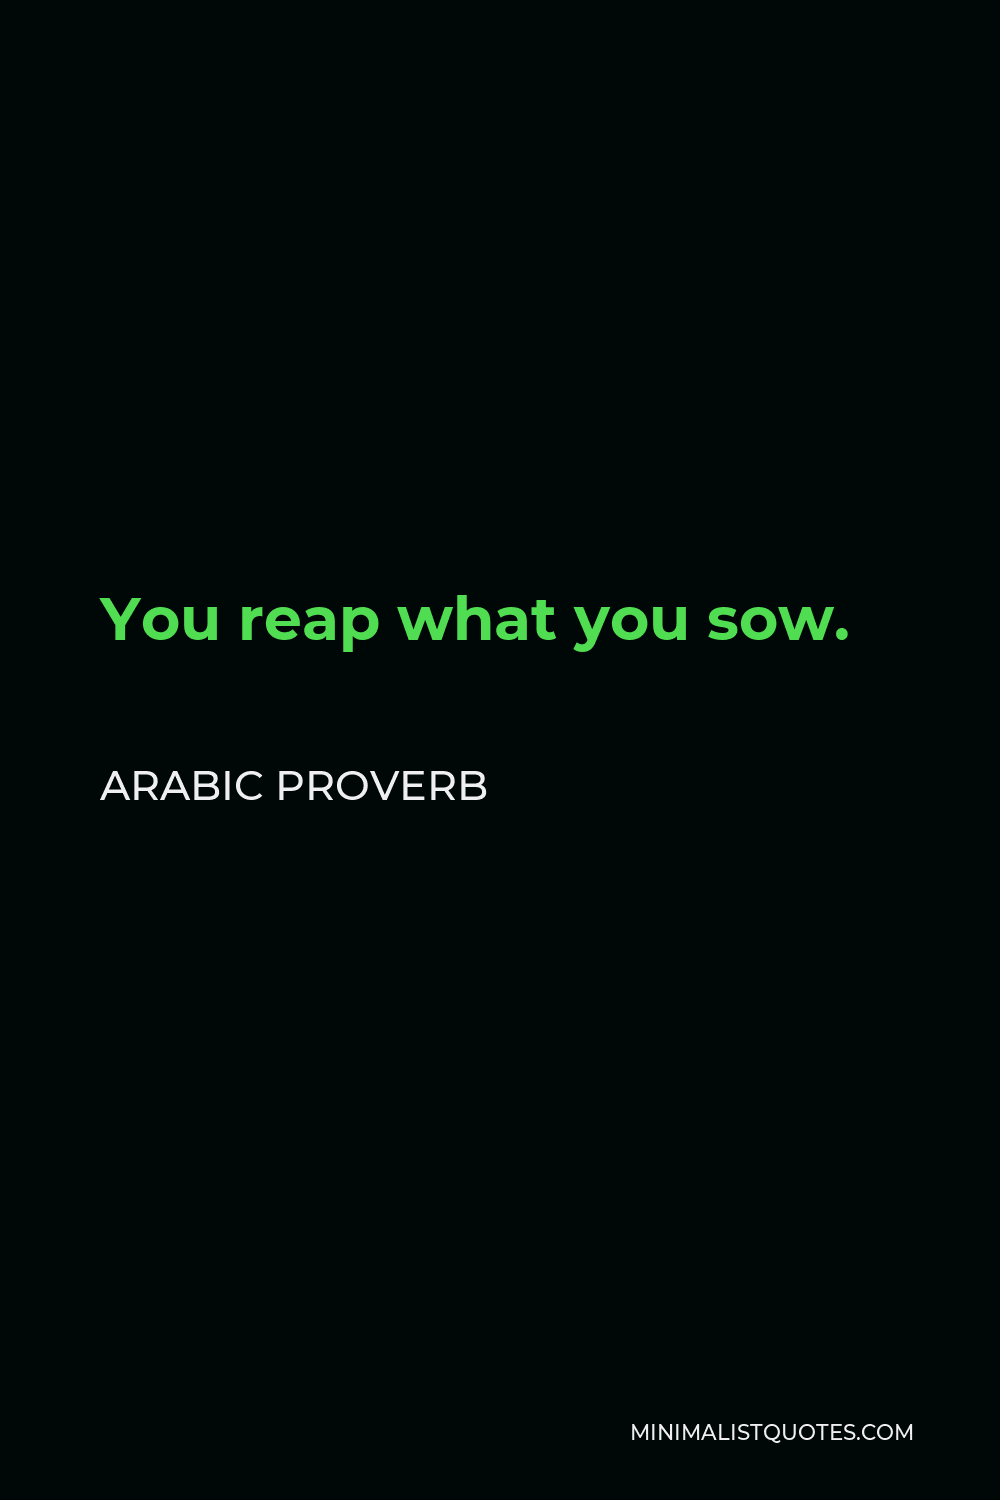 Arabic Proverb Quote - You reap what you sow.